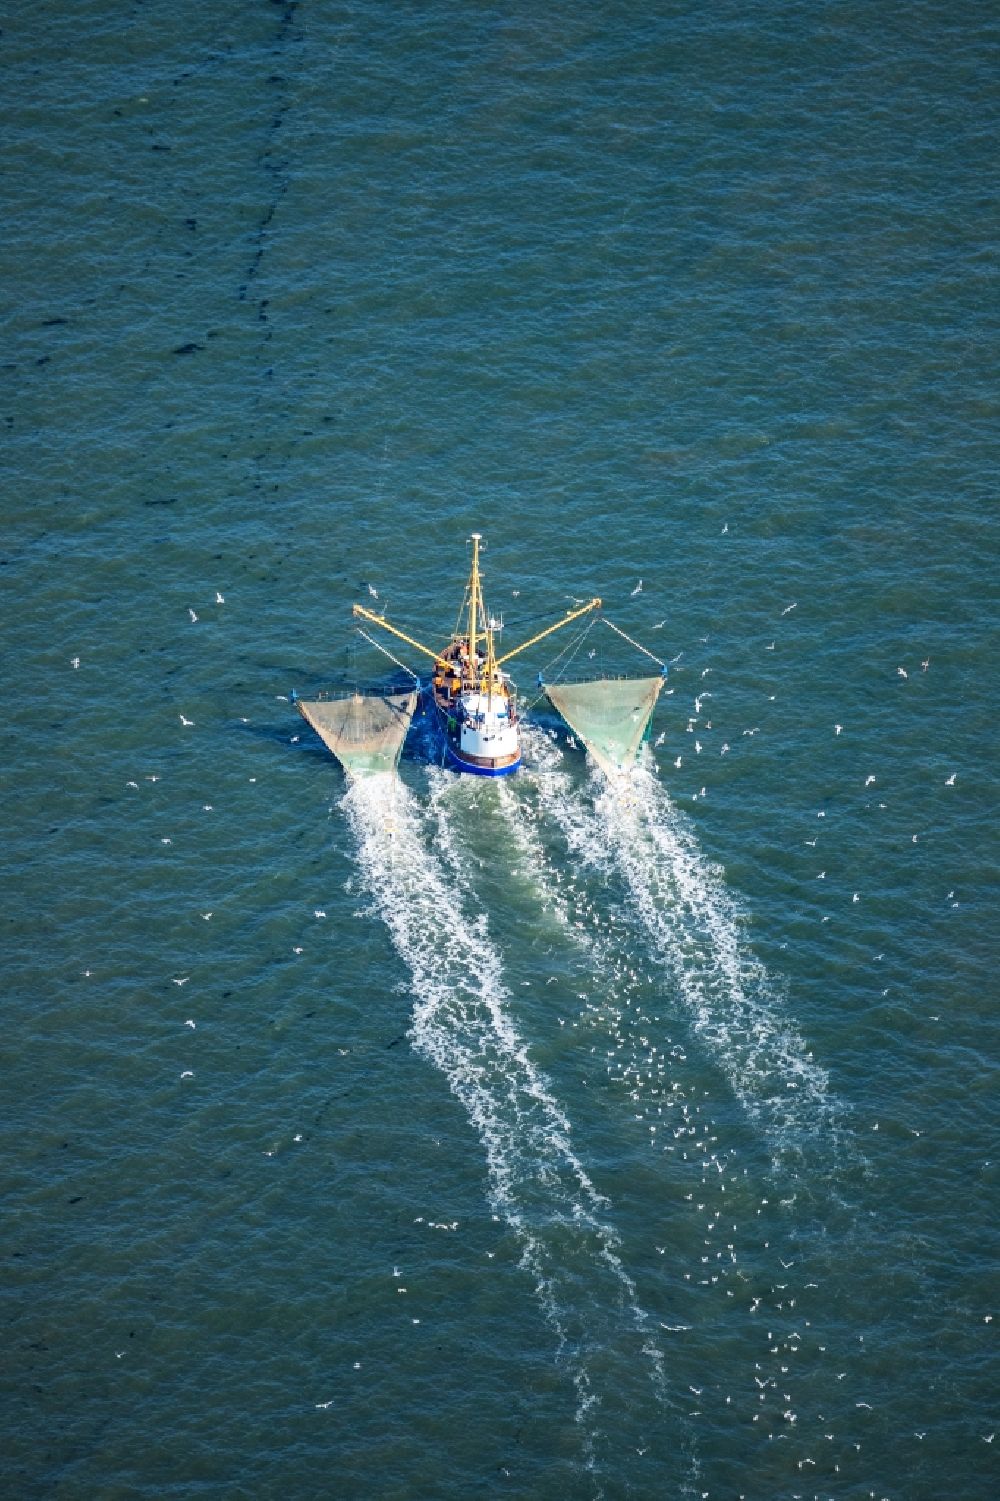 Pellworm from above - Shrimp boat on the way of North Sea in Buesum in the state Schleswig-Holstein